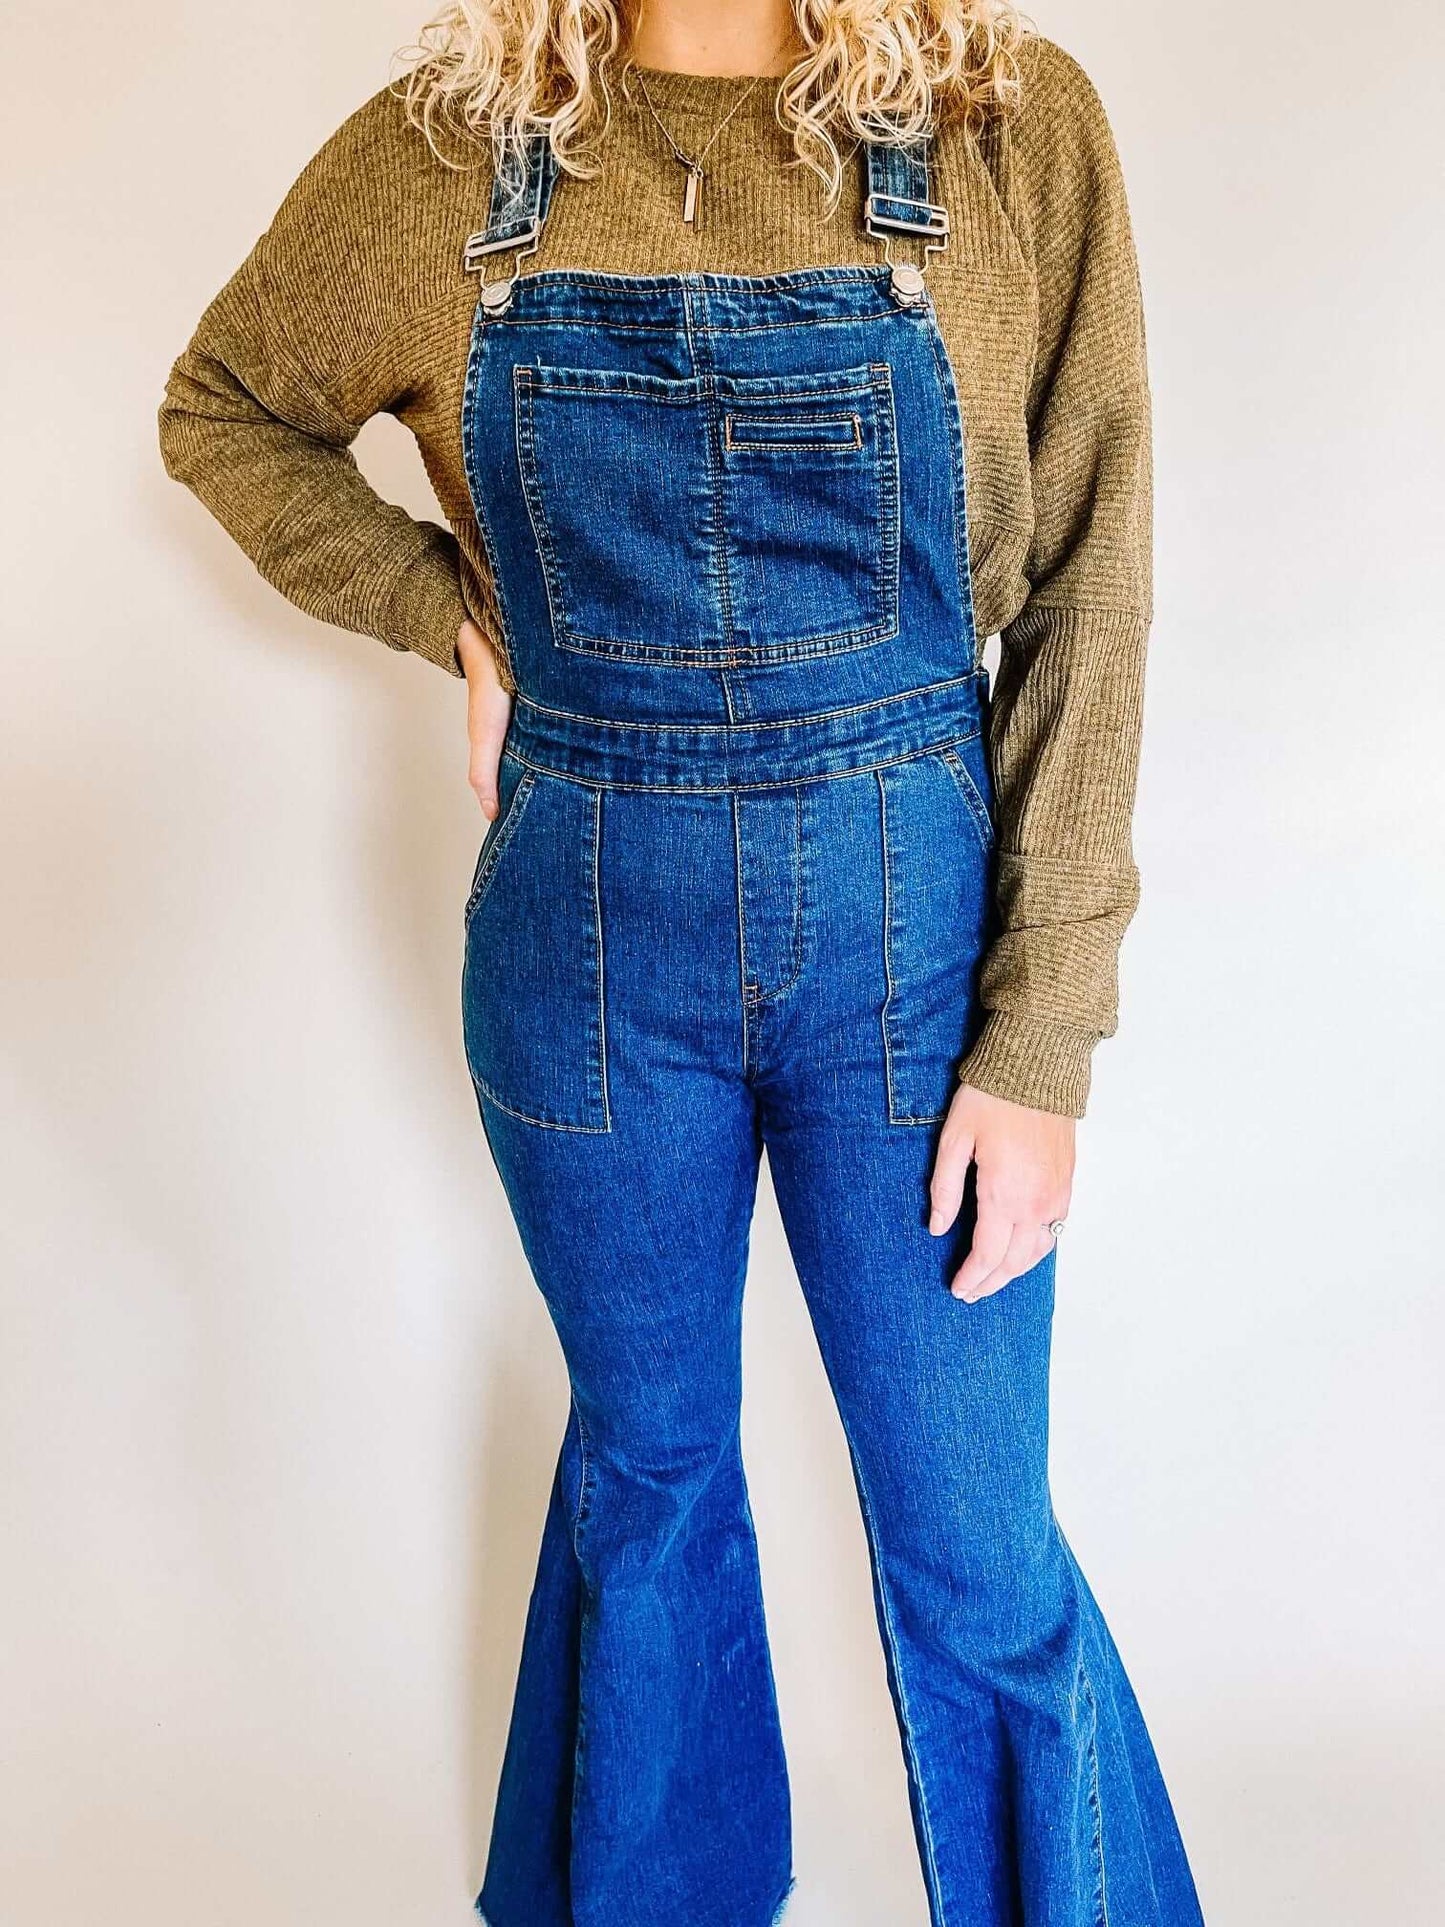 Stylish model wearing blue denim flare overalls paired with a mustard-colored sweater, completing the outfit with a trendy wide-brim hat and pointed-toe booties, creating a chic and modern look